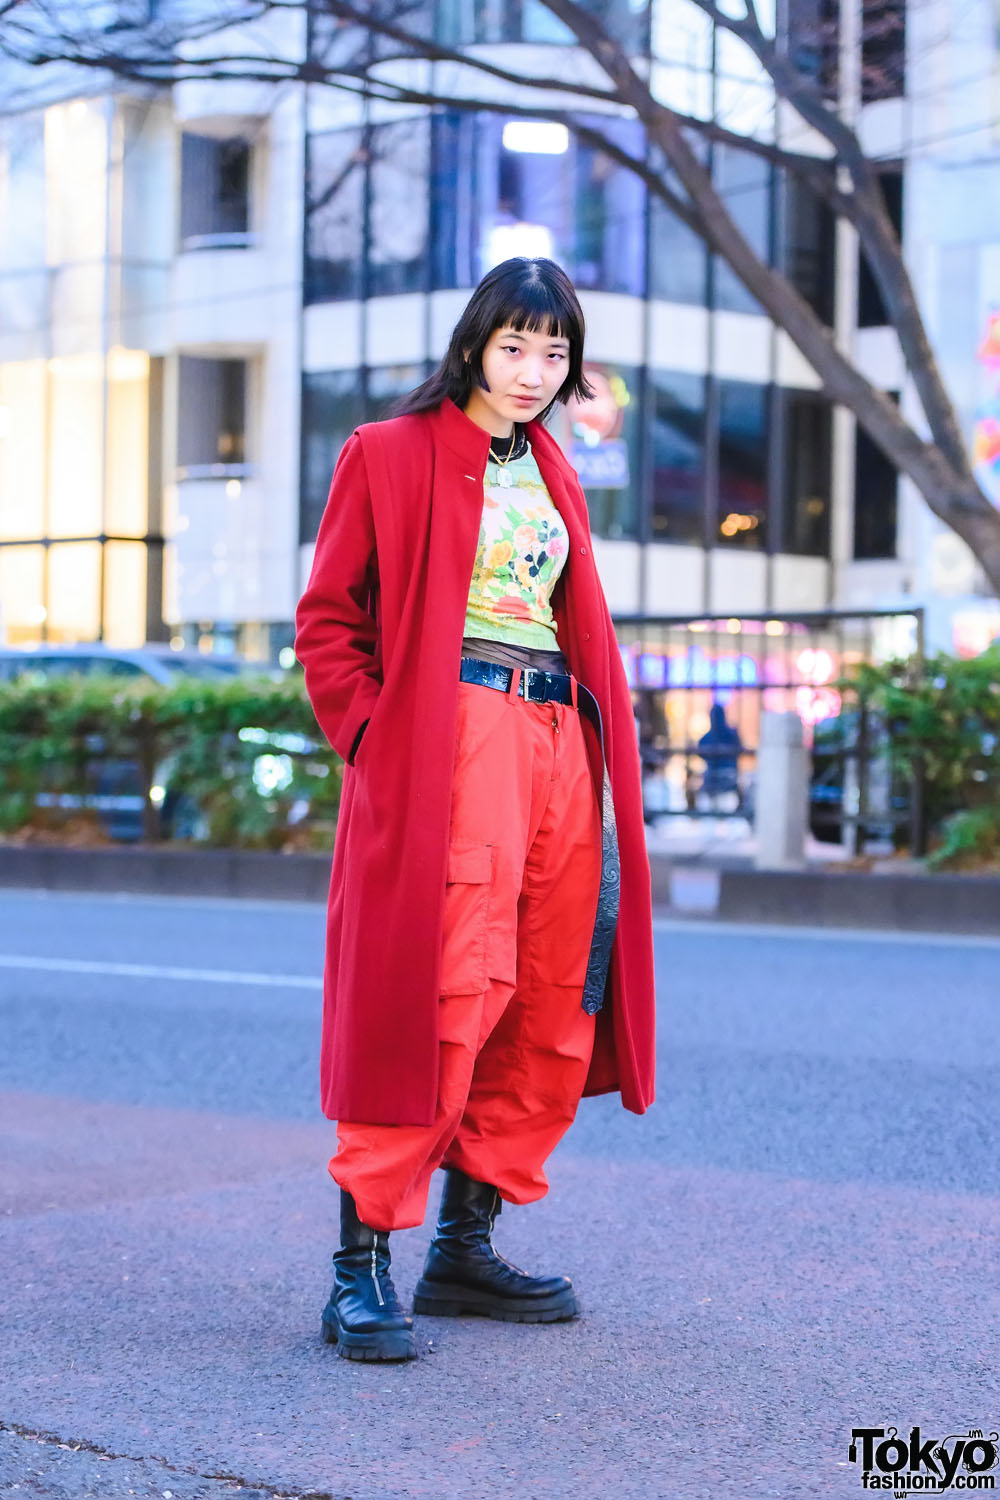 Japanese Model In All-Red Harajuku Street Style w/ END. Long Coat, Otoe Printed Shirt, Mesh Undershirt, Baggy Cargo Pants, Vintage Pendant Necklace & ASOS Zippered Leather Boots